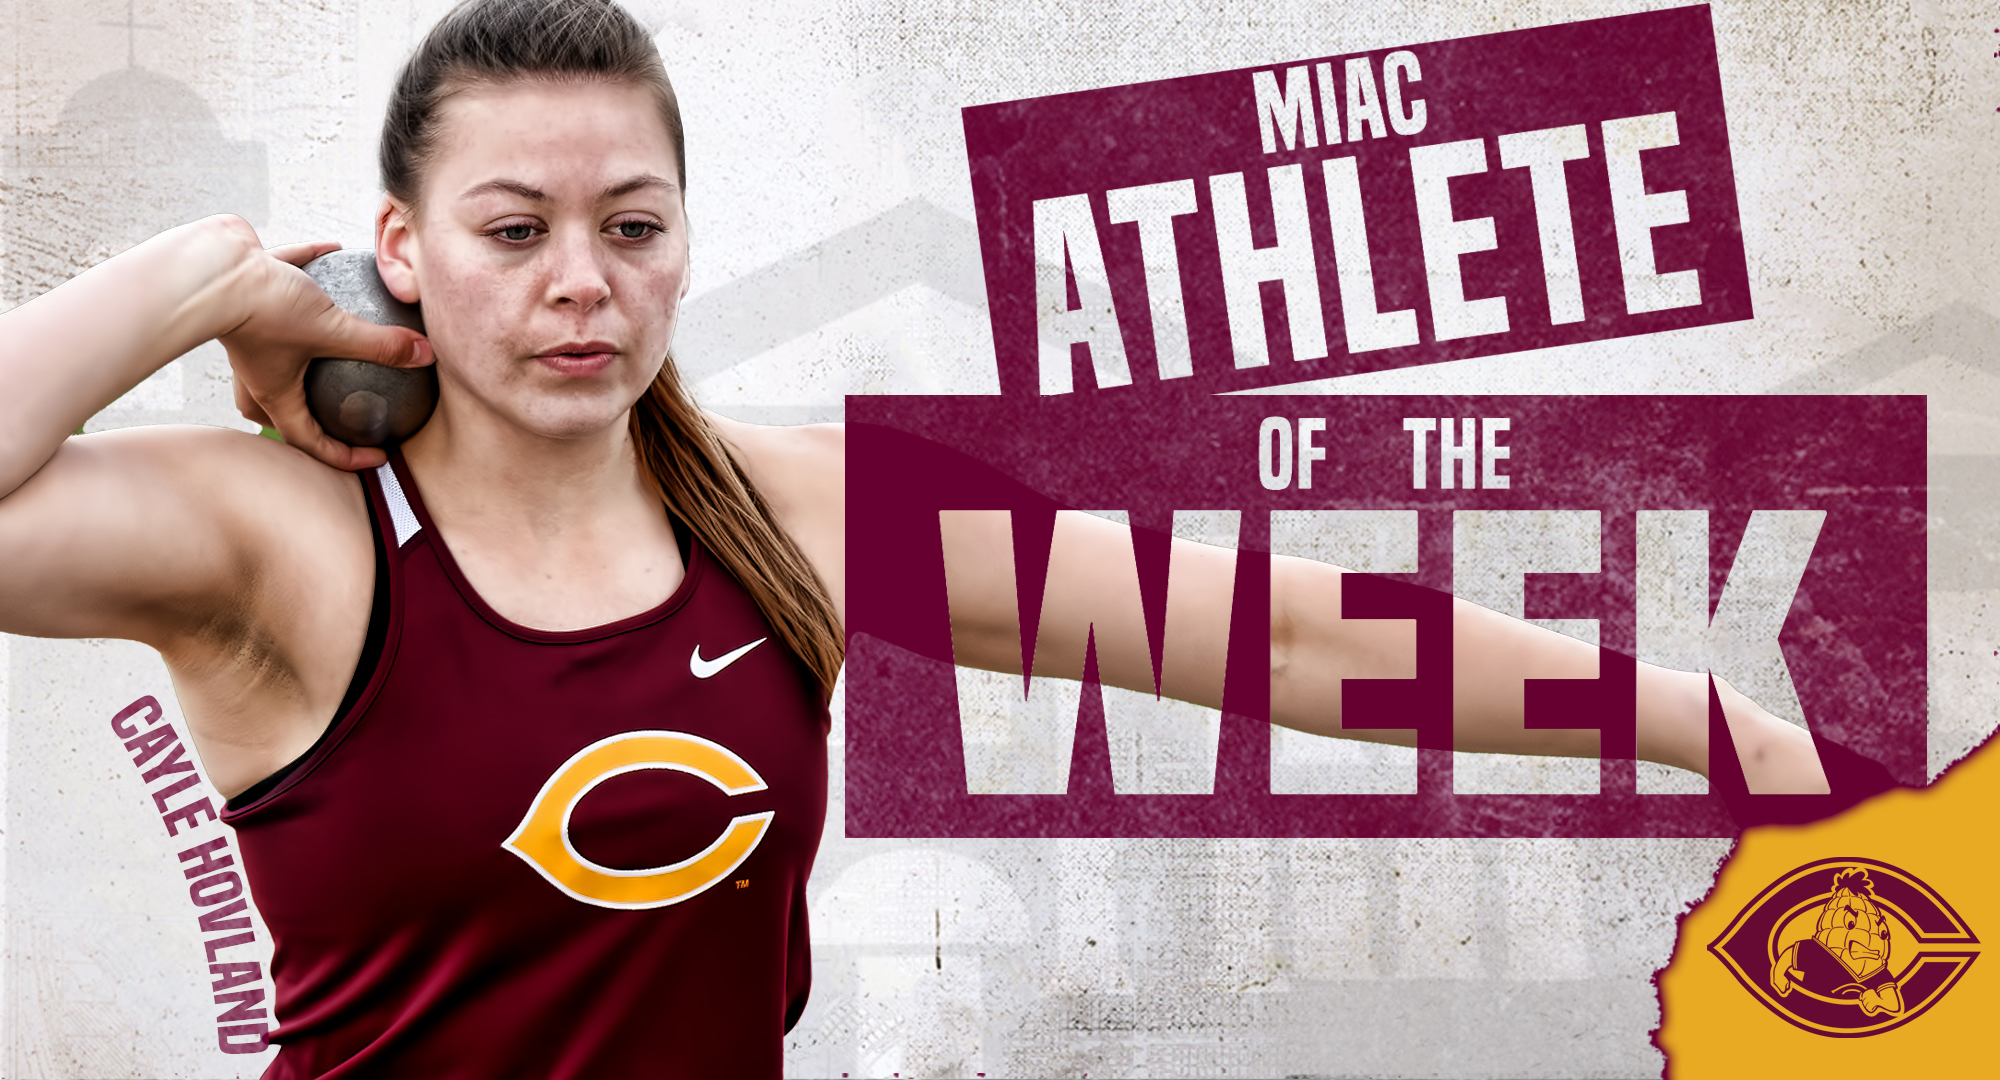 Cayle Hovland was named the MIAC Field Athlete of the Week after winning the discus and finishing second in both the shot put and hammer throw at the St. Olaf Ole Open on Saturday.